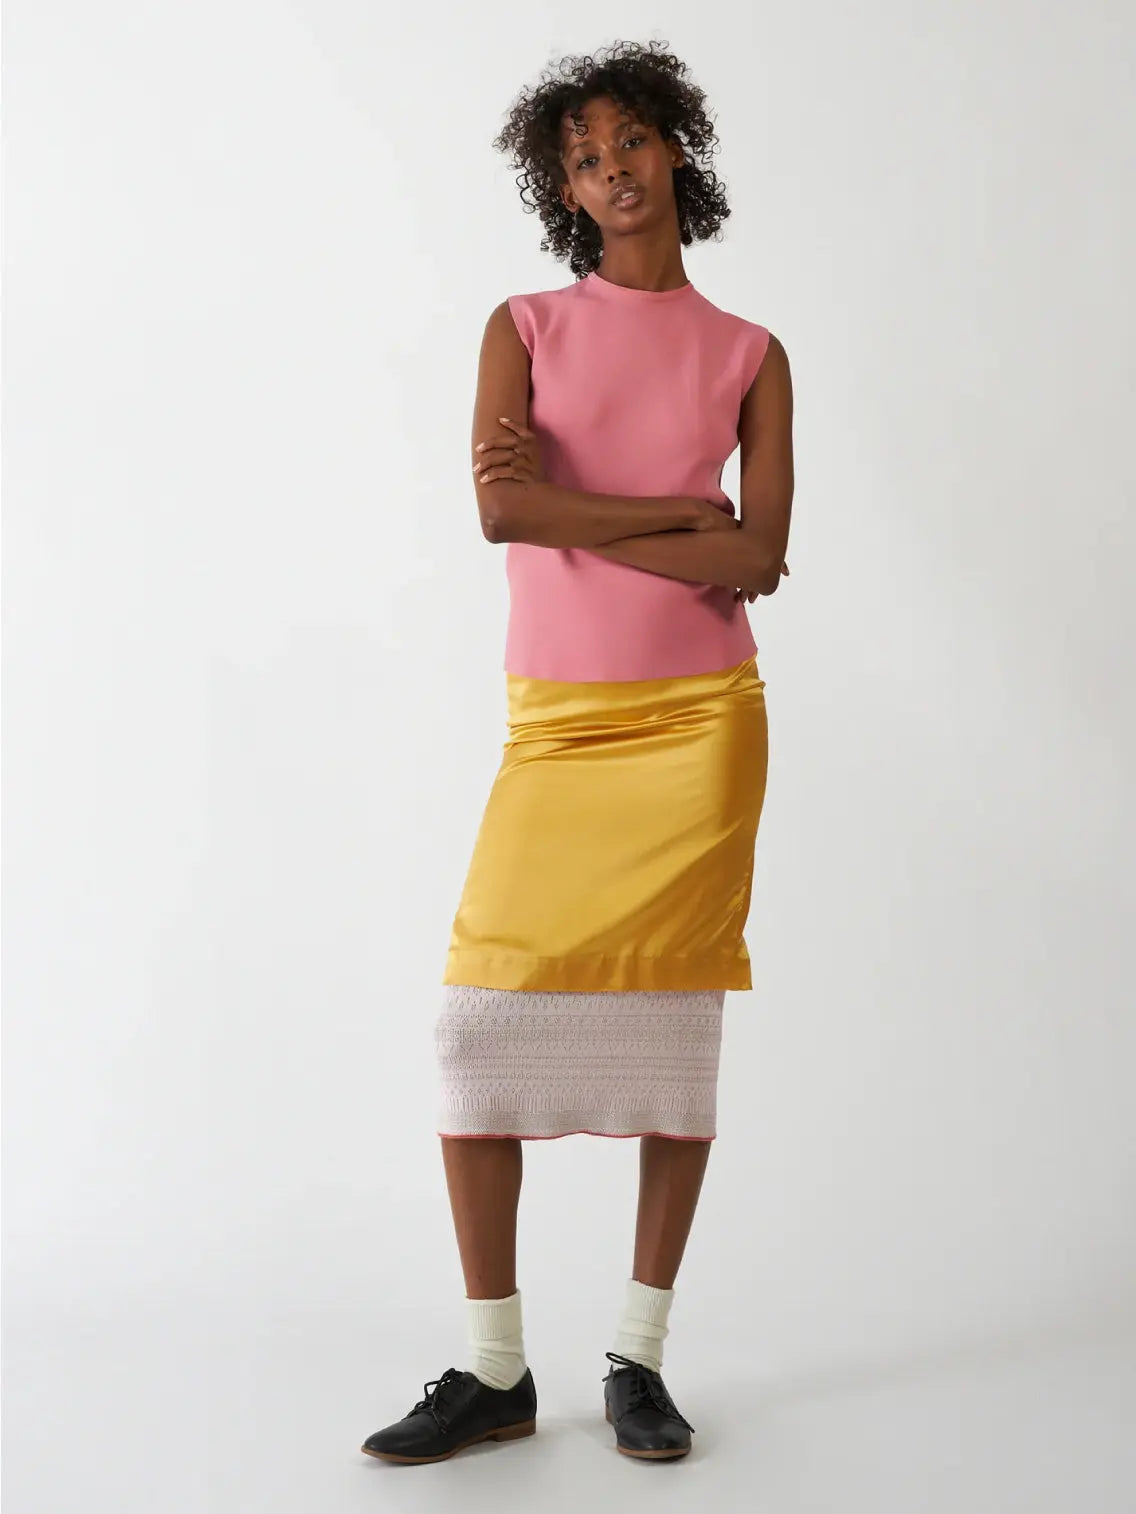 A Bielo Neru Top Pink with a high neckline and a back zipper closure. The lightweight, slightly textured fabric is perfect for warm days. Laid flat against a white background, this chic piece is available at BassalStore in Barcelona.